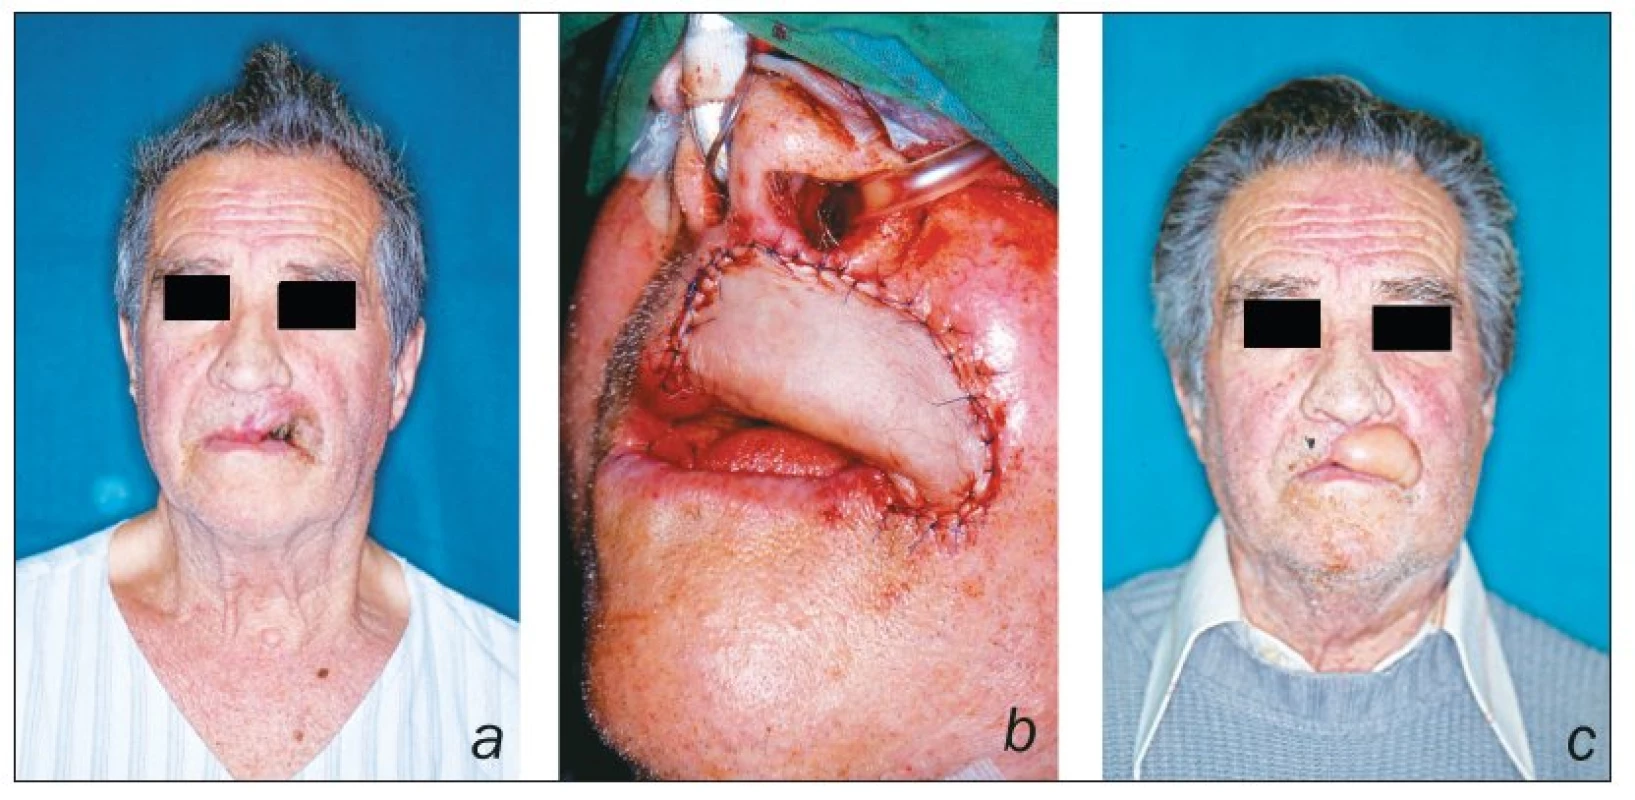 Patient presented with large basal cell carcinoma of the upper lip (a); after insetting of radial forearm
flap (b); postoperative result (c)